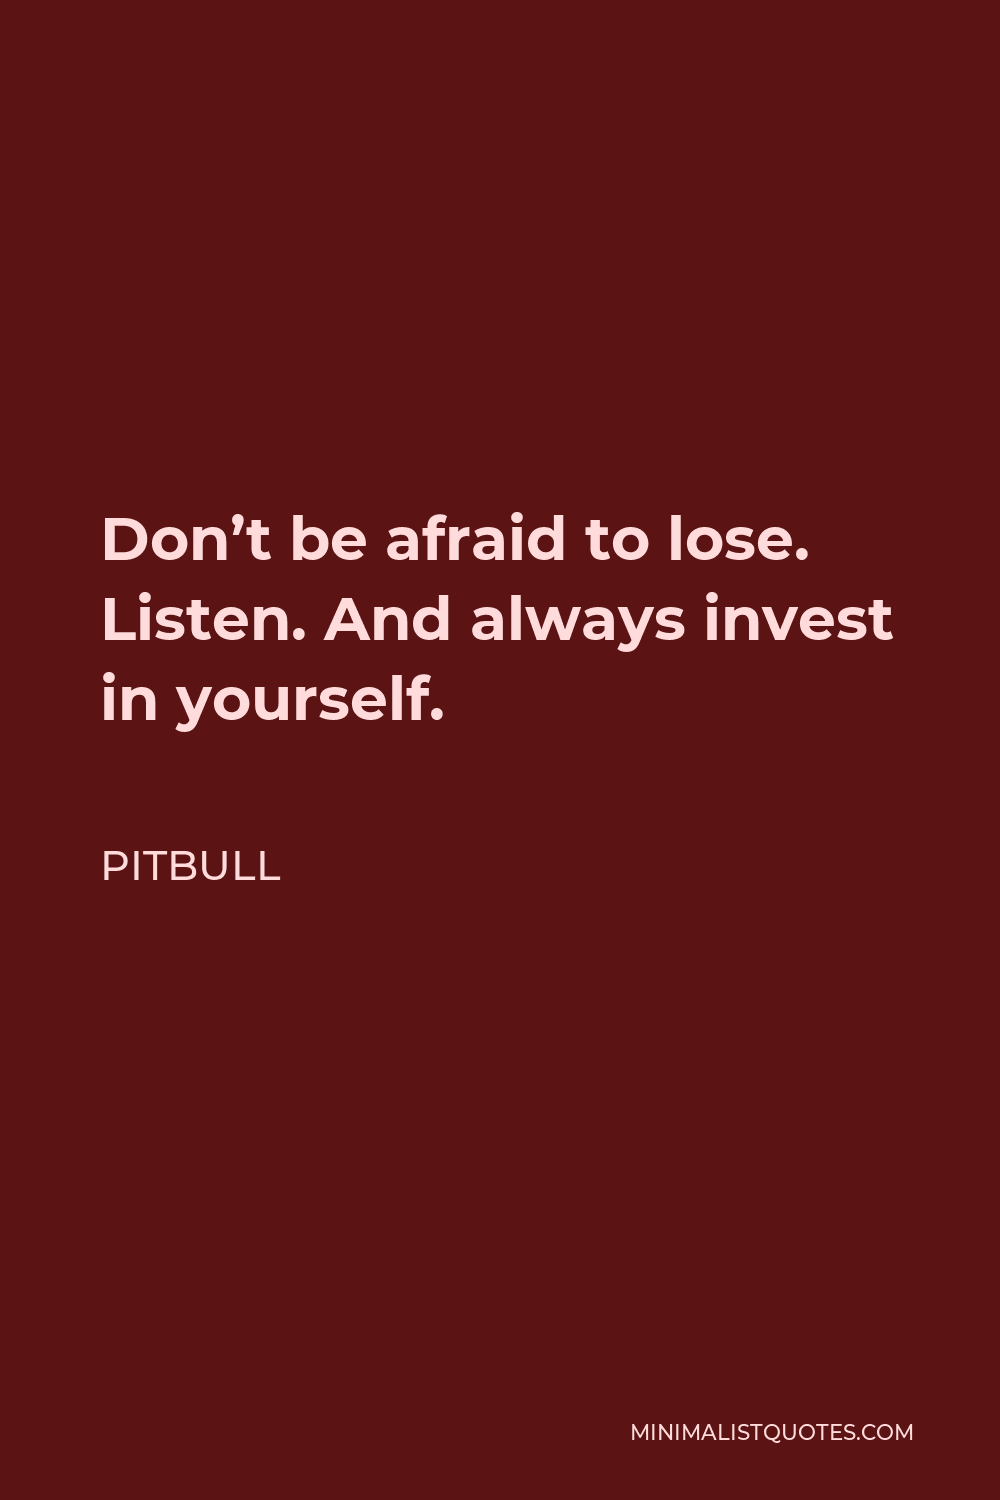 Pitbull Quote - Don’t be afraid to lose. Listen. And always invest in yourself.